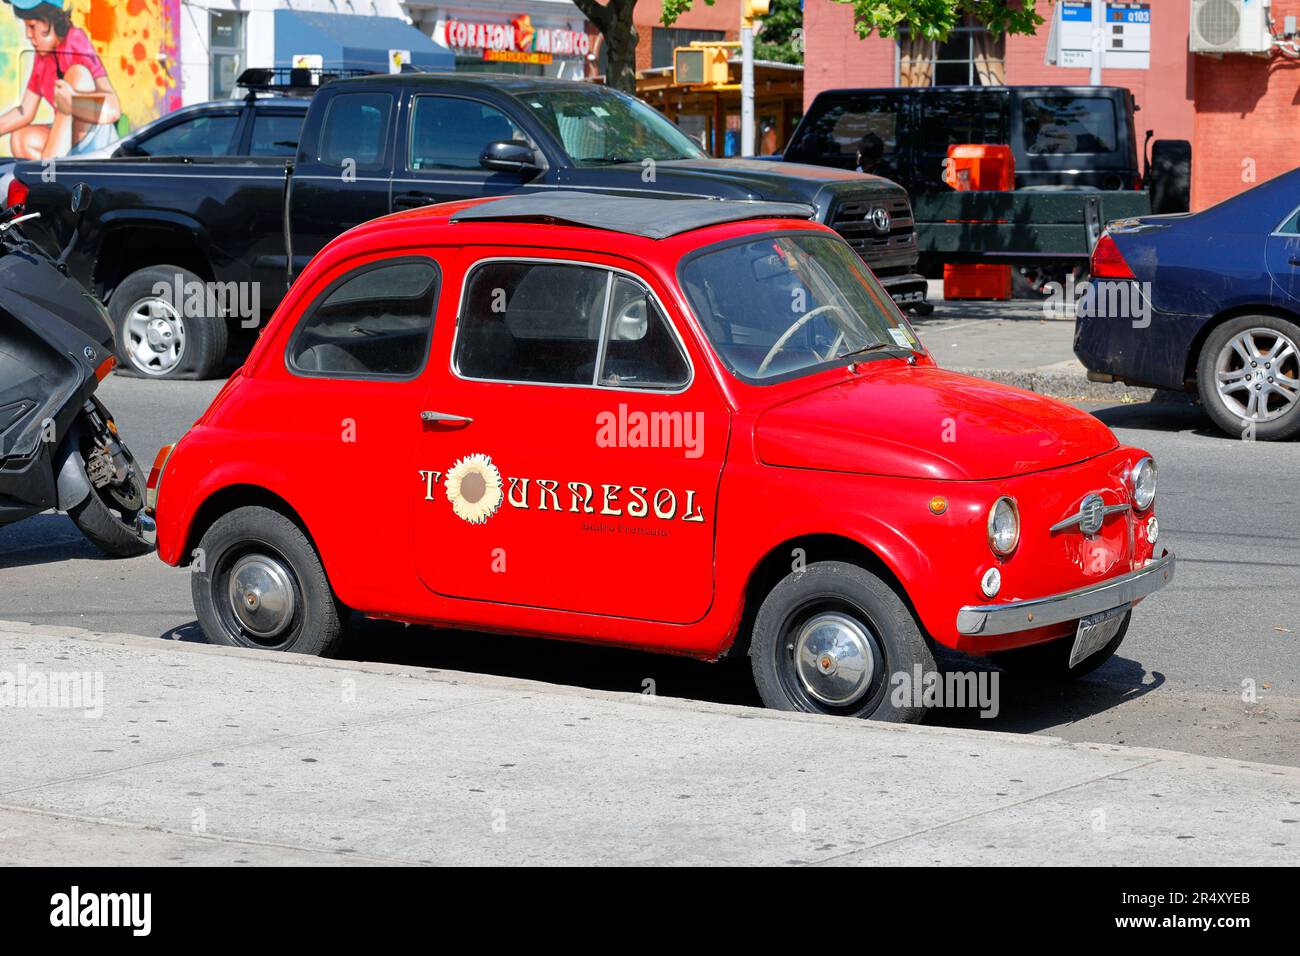 A Vintage Fiat 500 red car with Tournesol Bistro Francais marked on the doors. Stock Photo